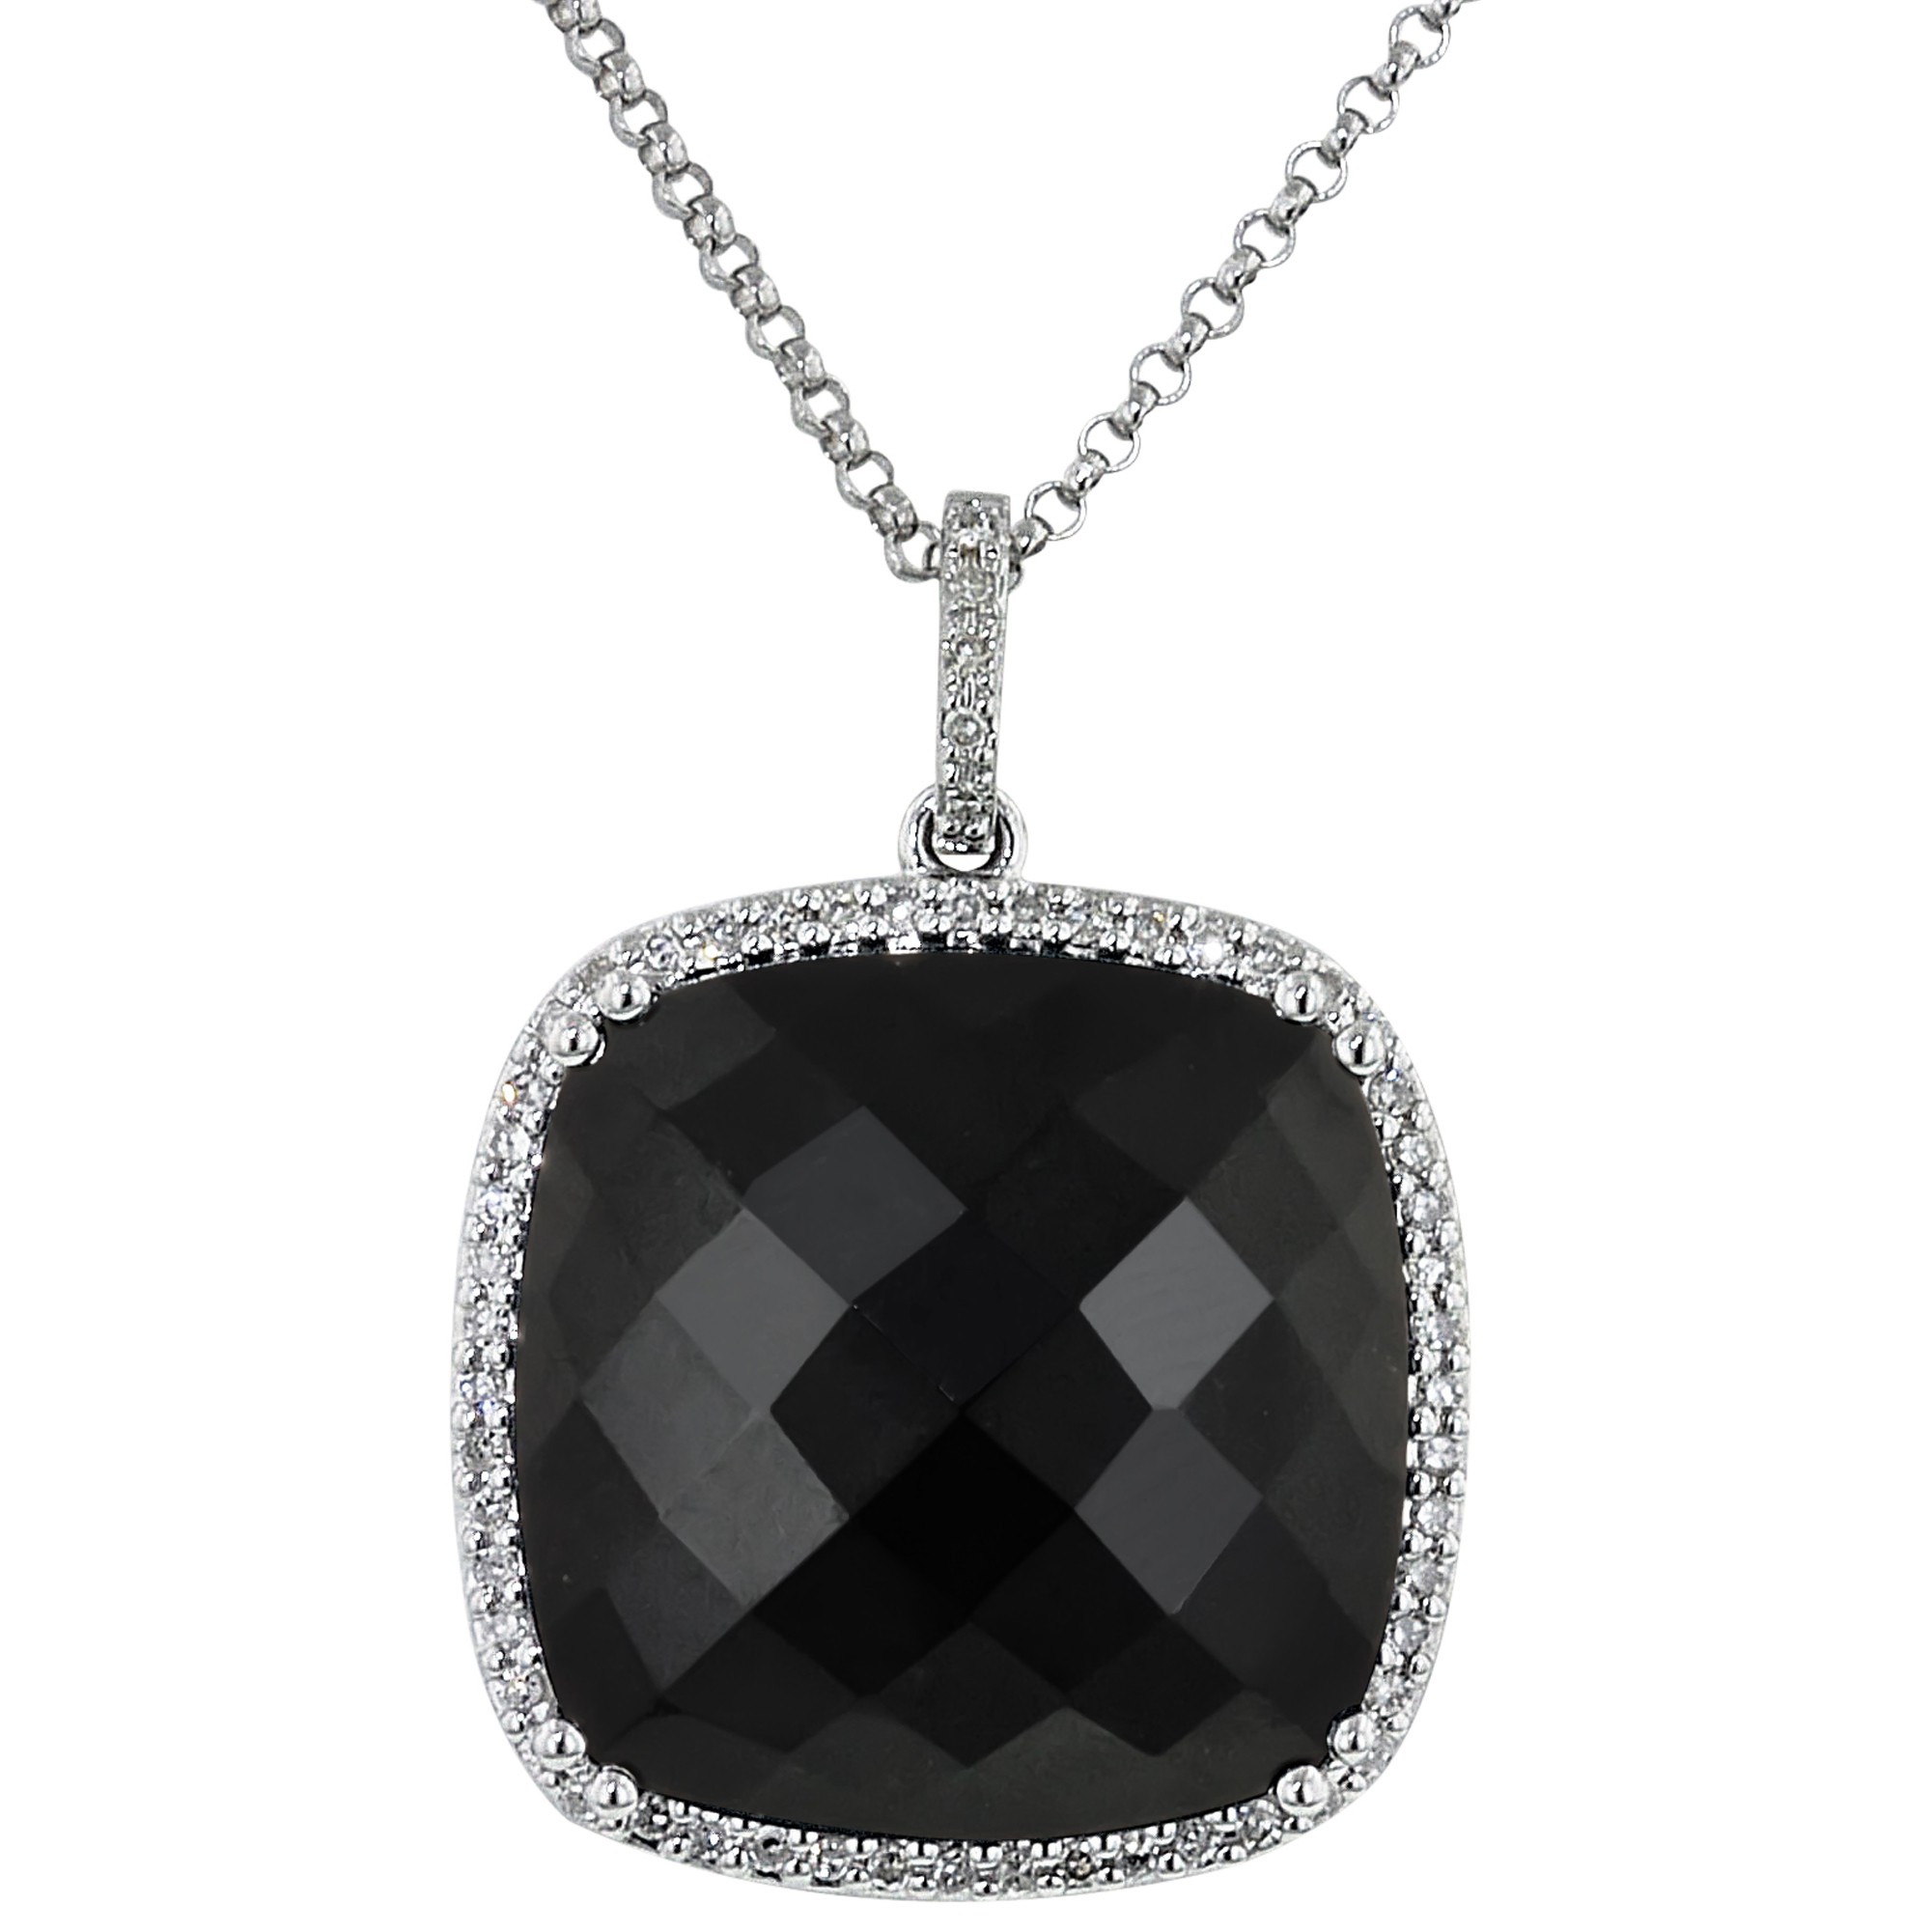 dabakarov black onyx necklace with diamonds in 14kt white gold (1/7ct tw) nydmmff